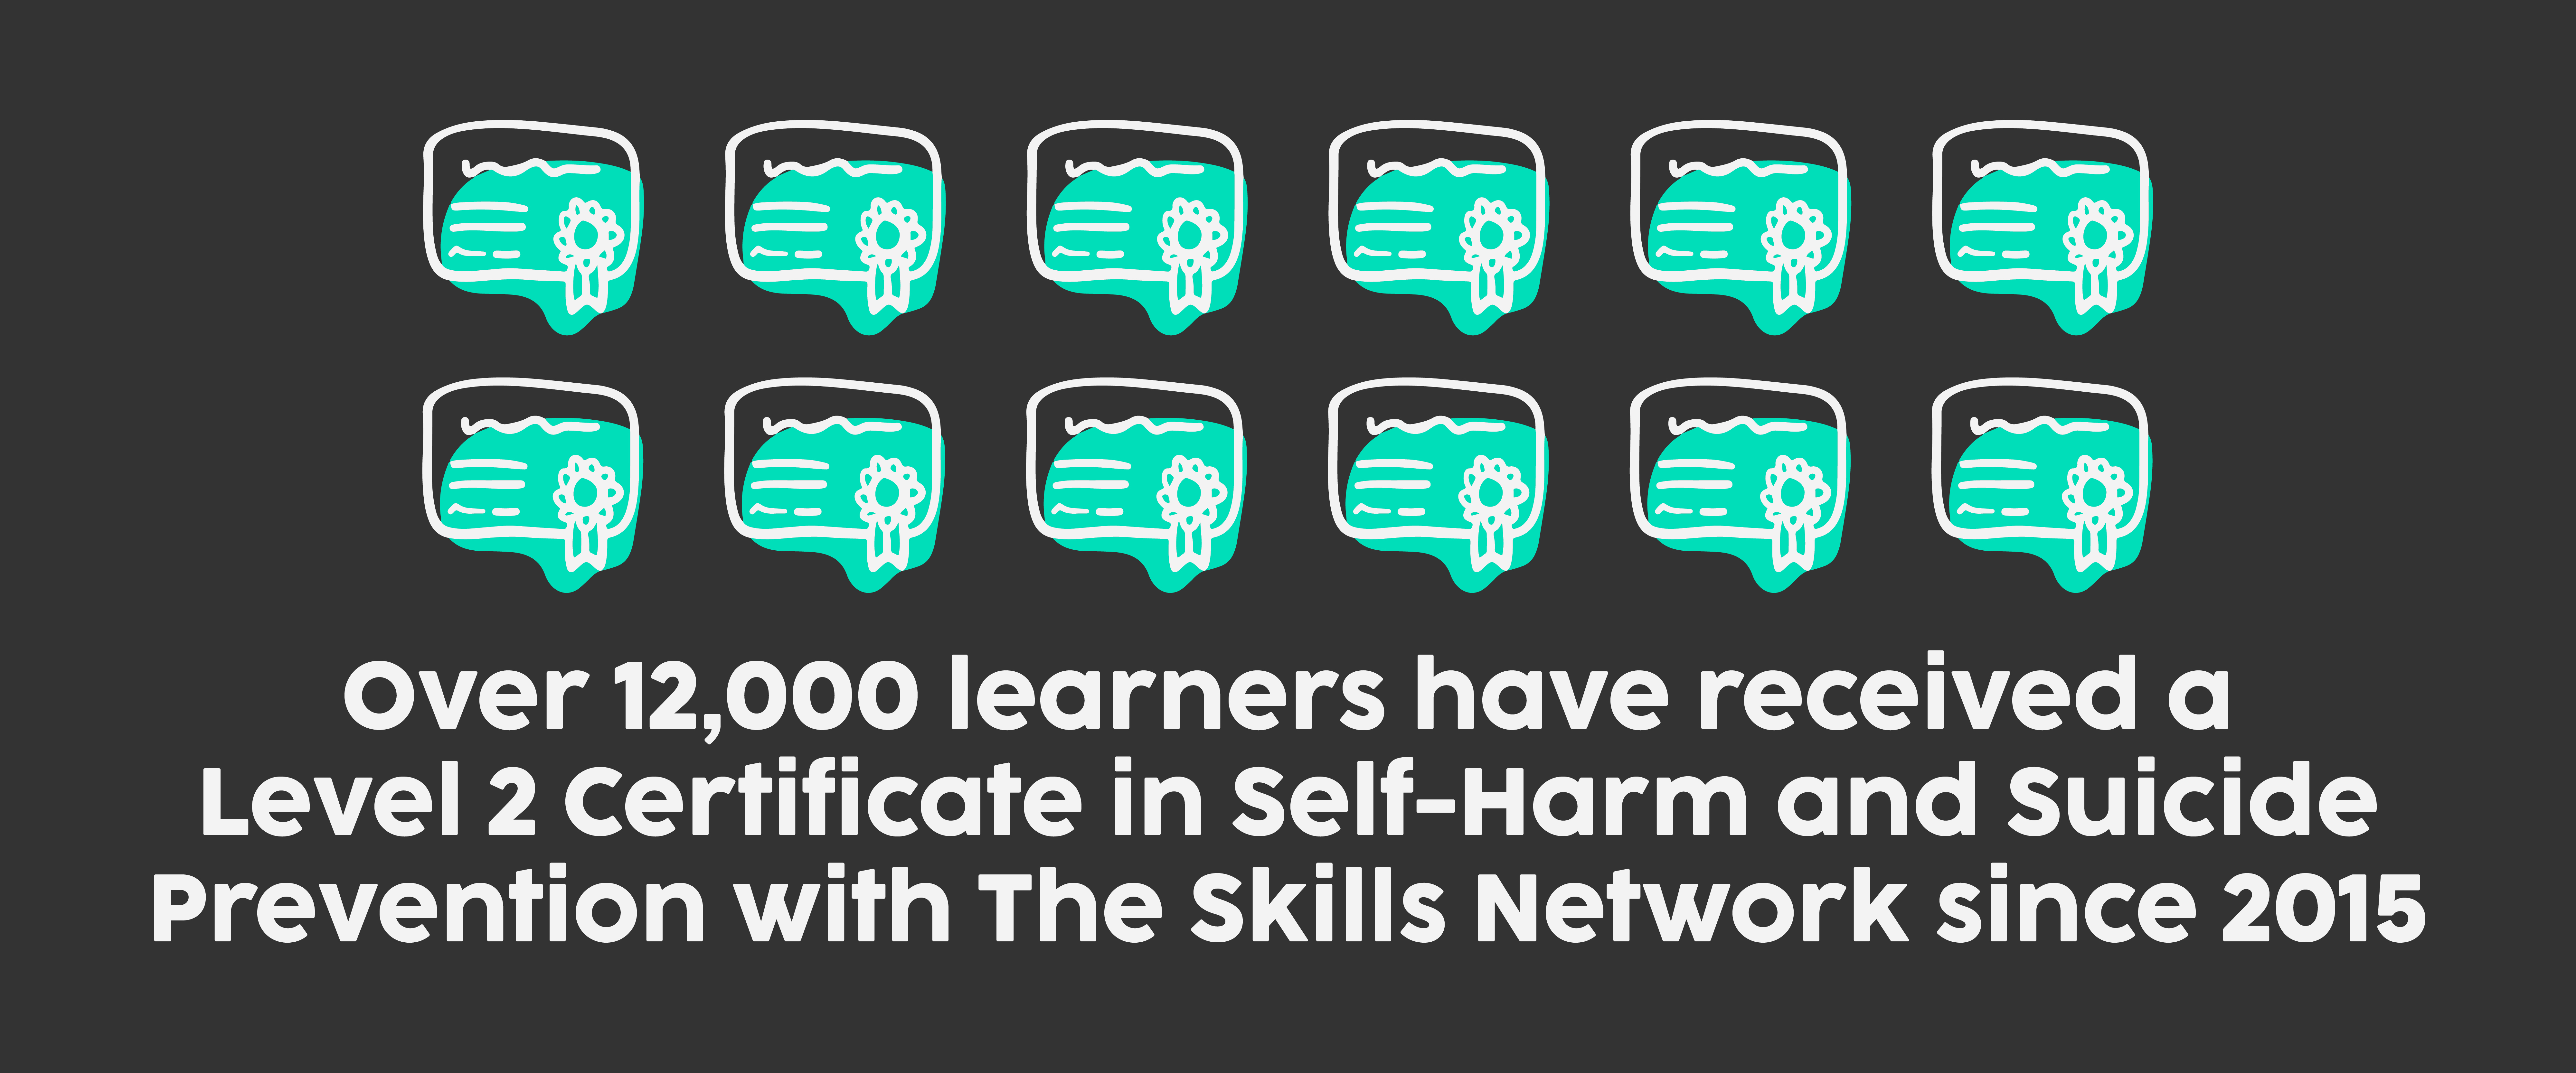 over 12,000 learners have completed the online Level 2 Certificate in Self-Harm and Suicide Awareness and Prevention since 2015